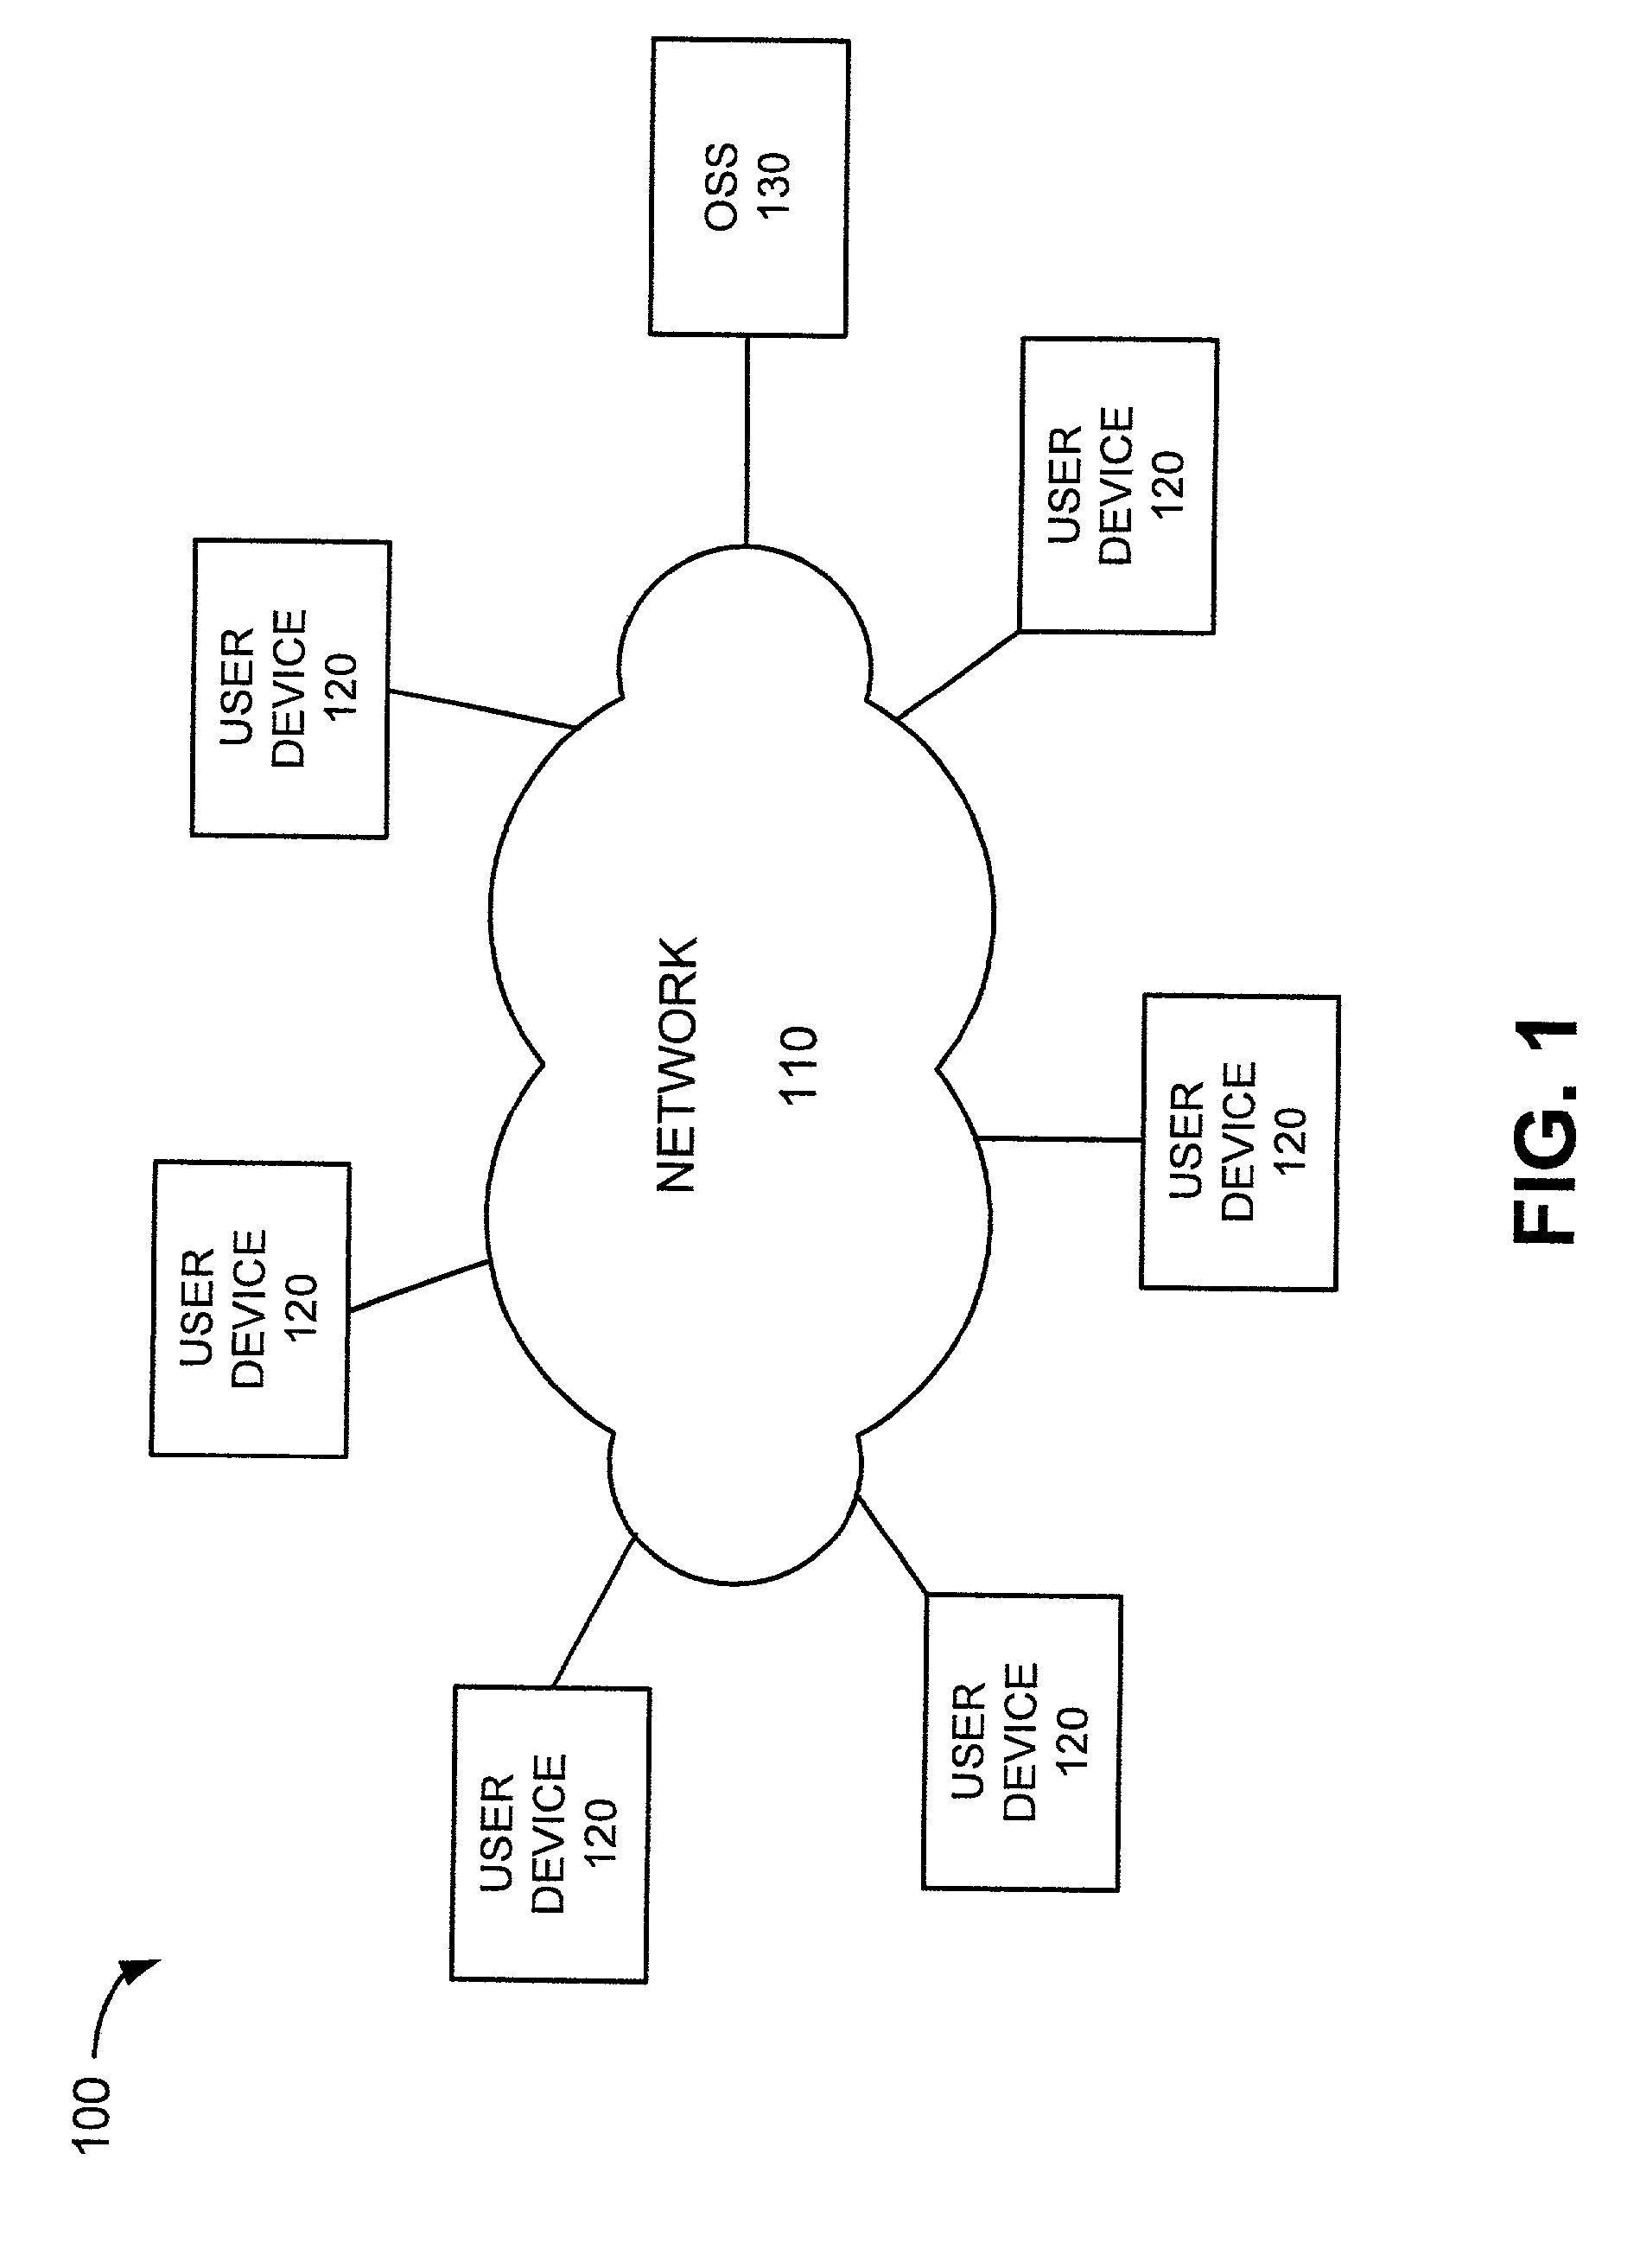 Systems and methods for communicating from an integration platform to a provisioning server